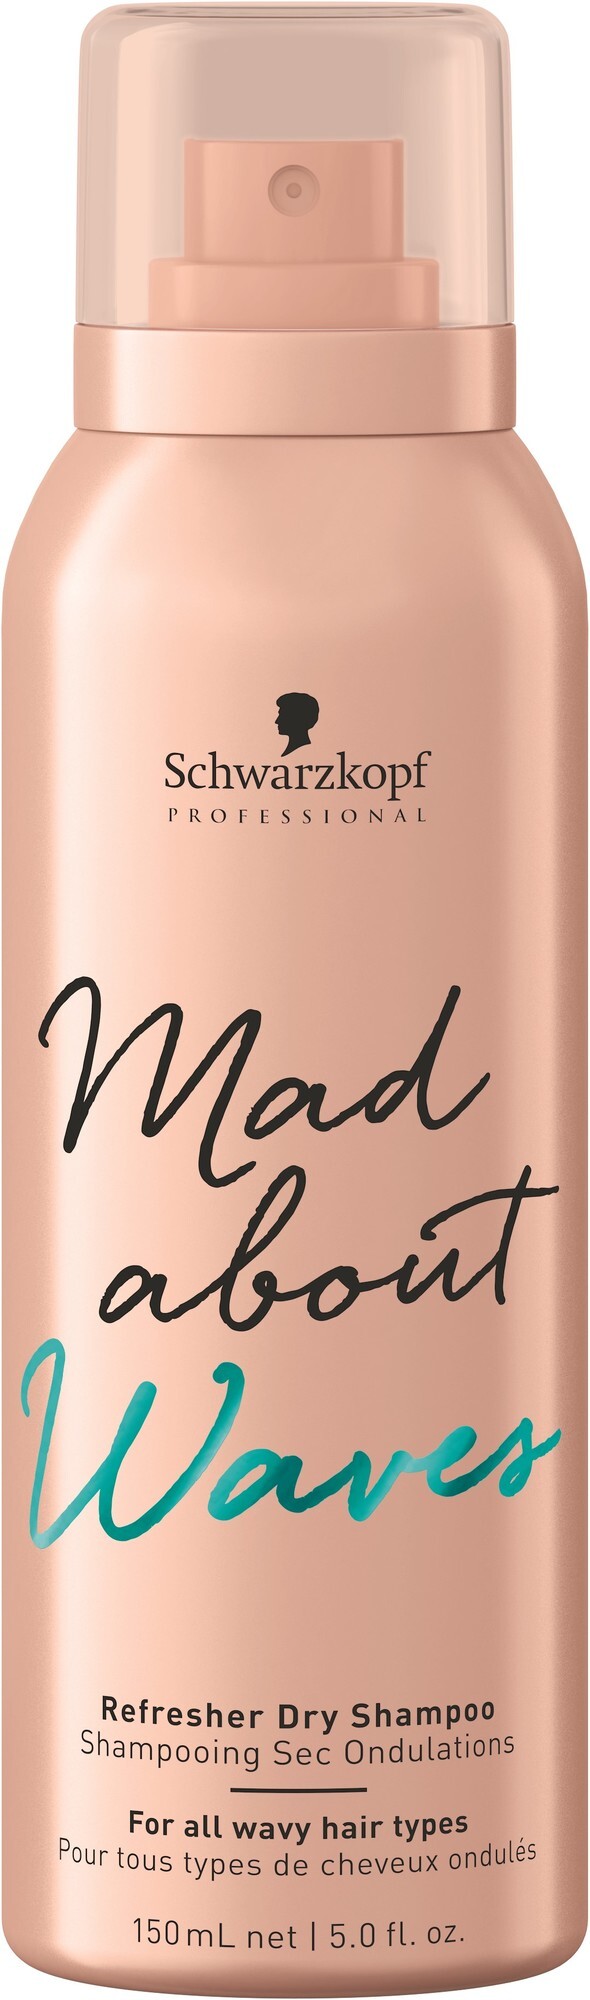 Schwarzkopf Professional mad about waves refresher dry shampoo 150ml